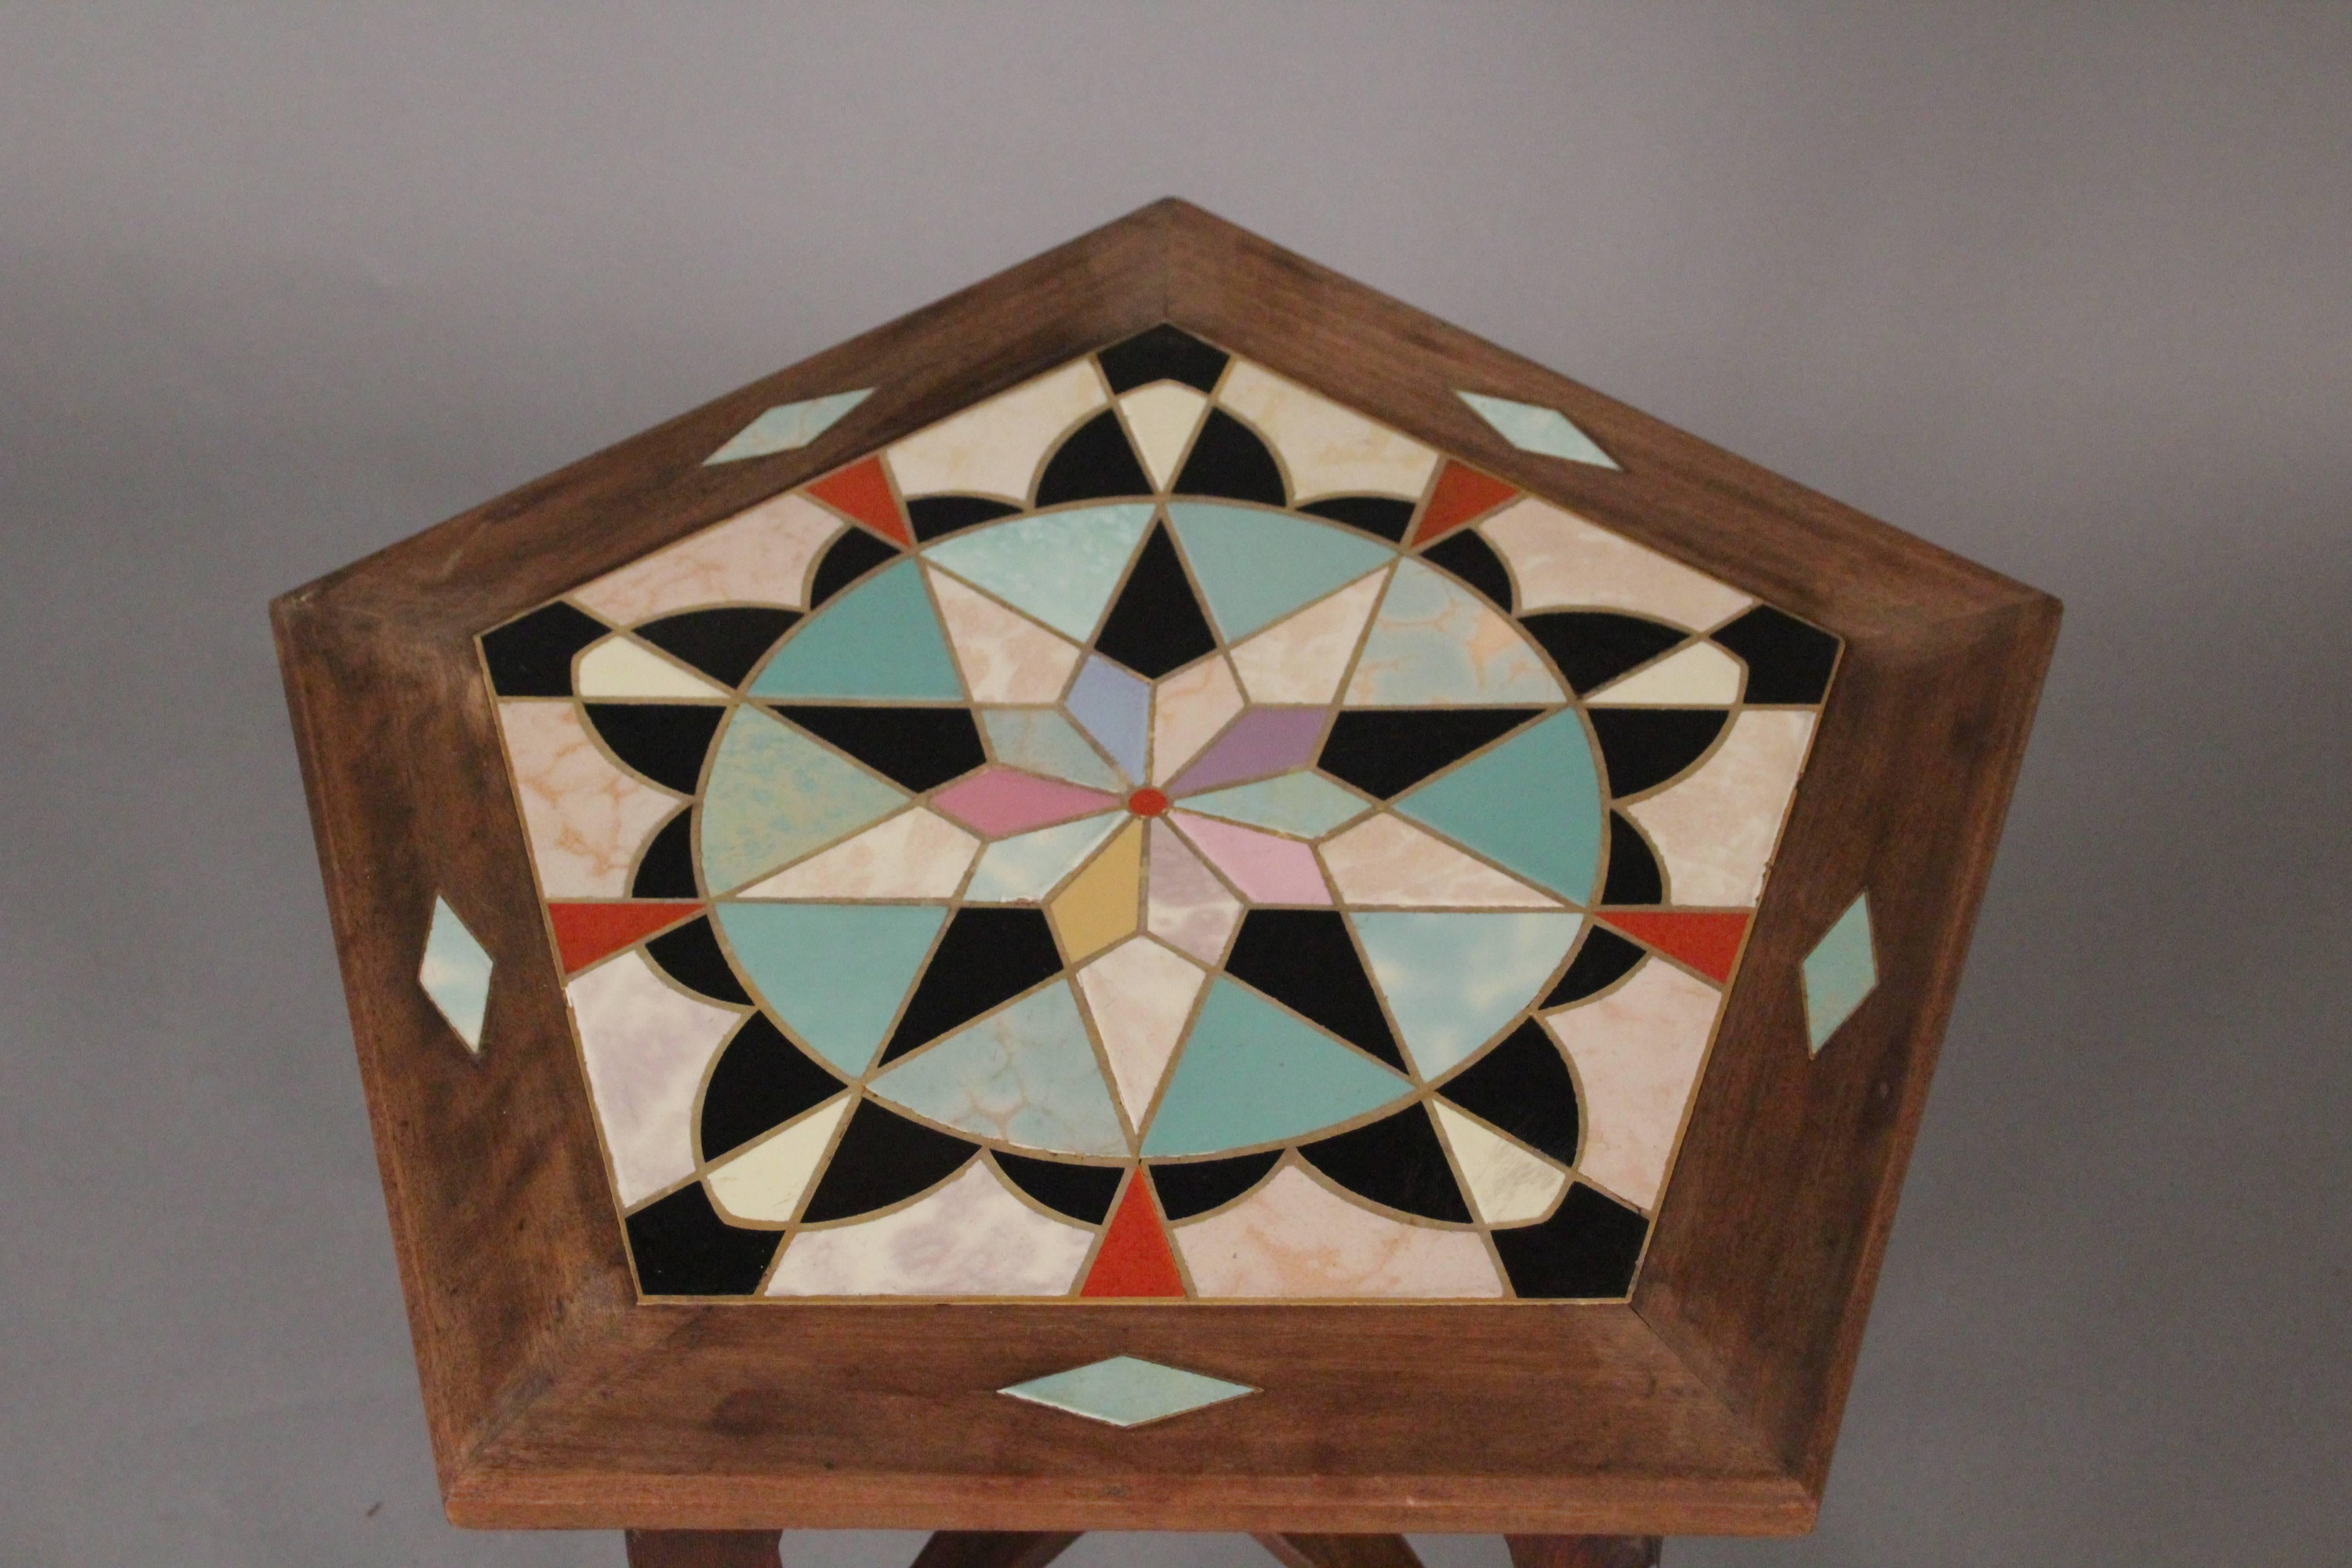 Exceptional hexagonal tile table with beautiful star motif, circa 1920s.